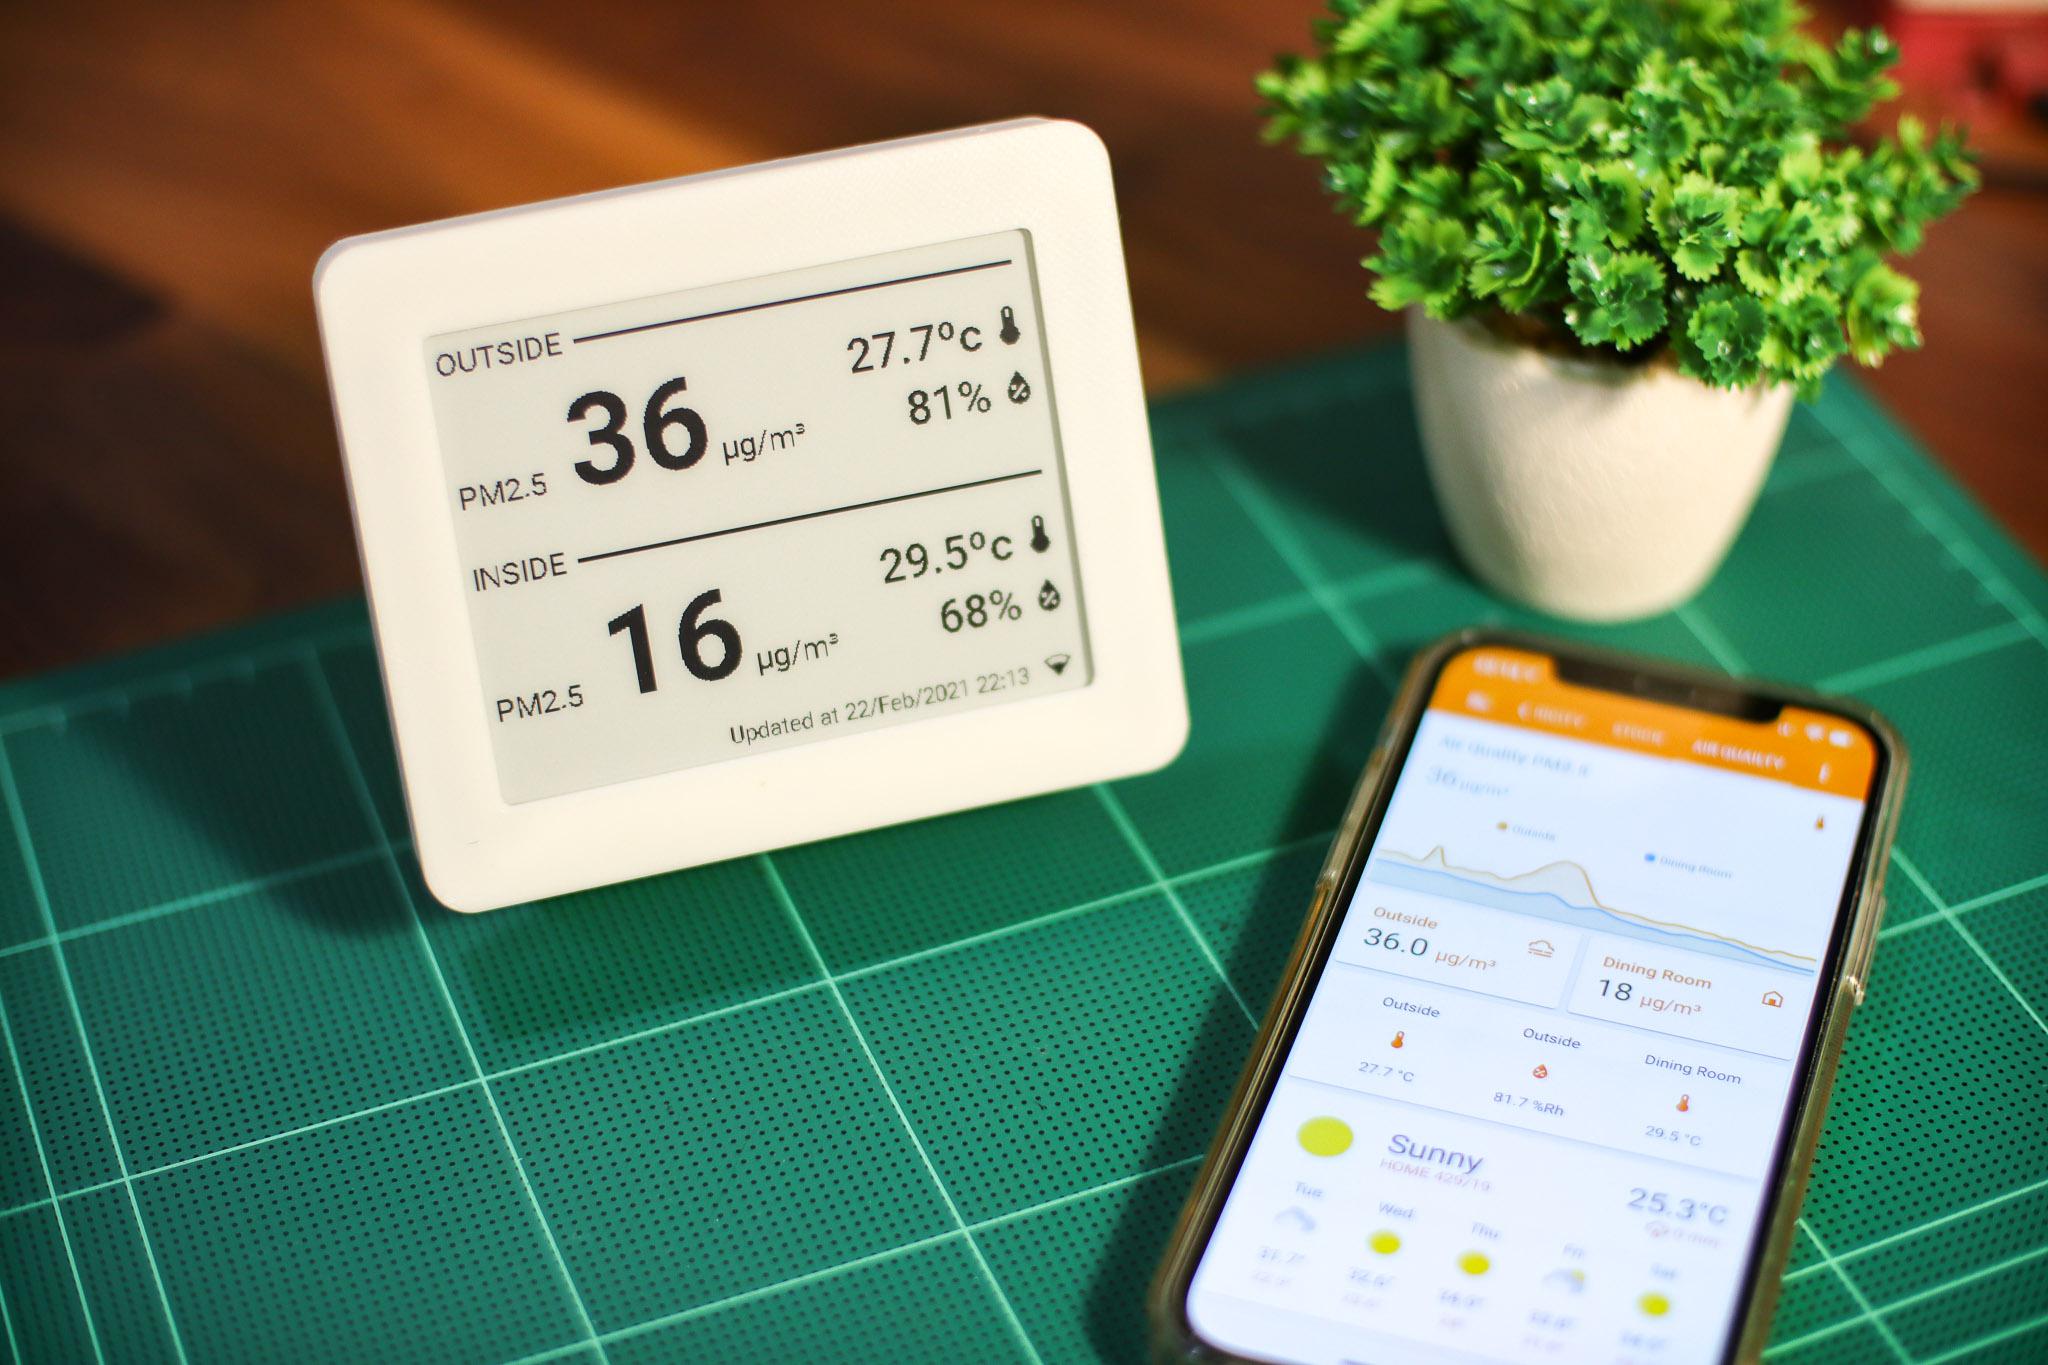 The Home Assistant Green is here to make the most powerful smart